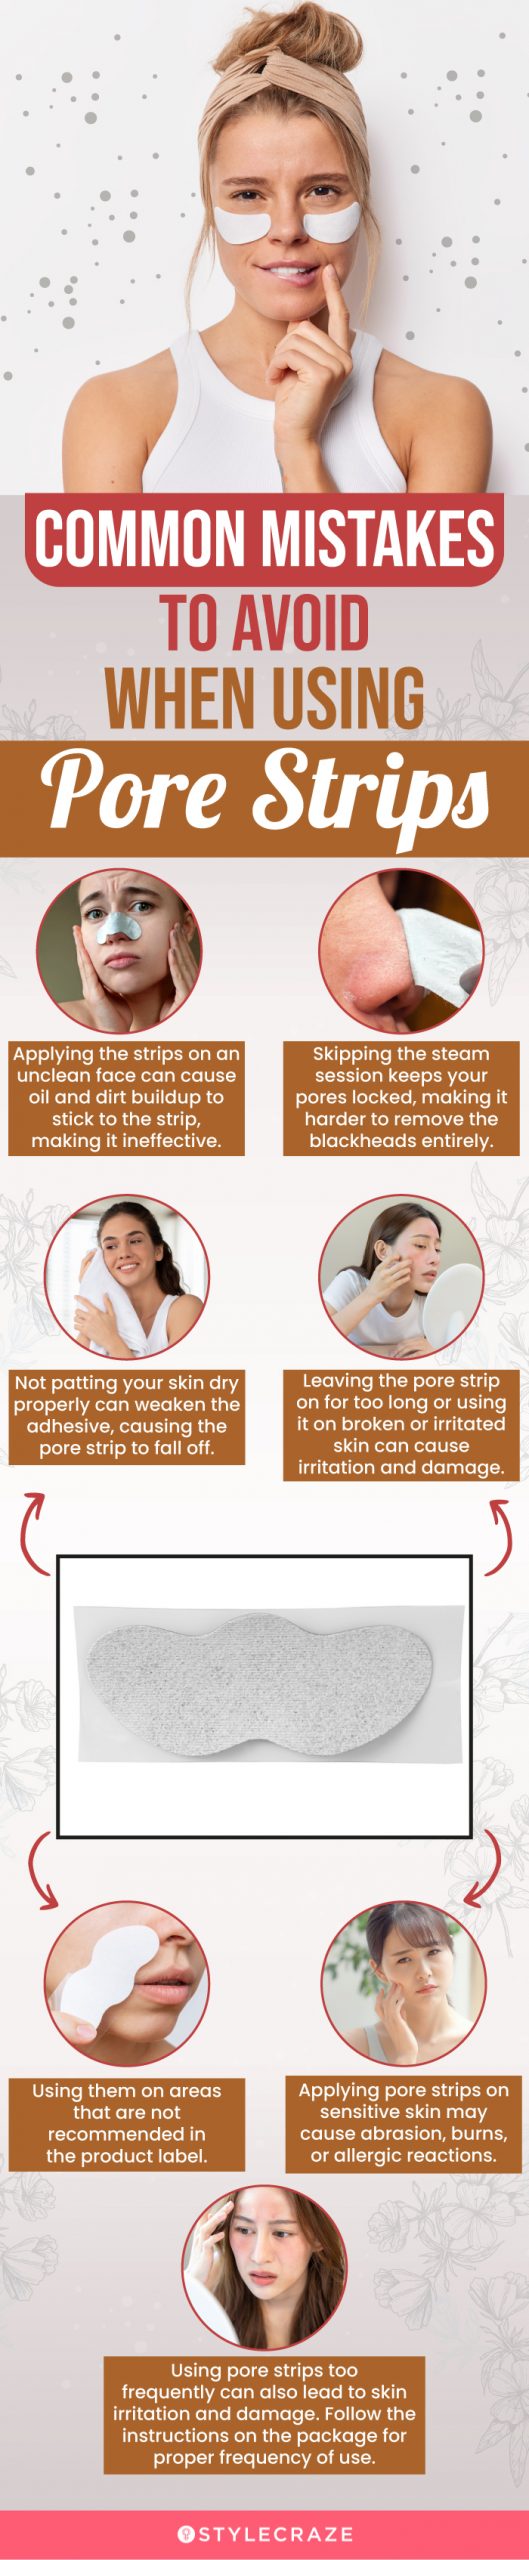 Common Mistakes To Avoid When Using Pore Strips (infographic)